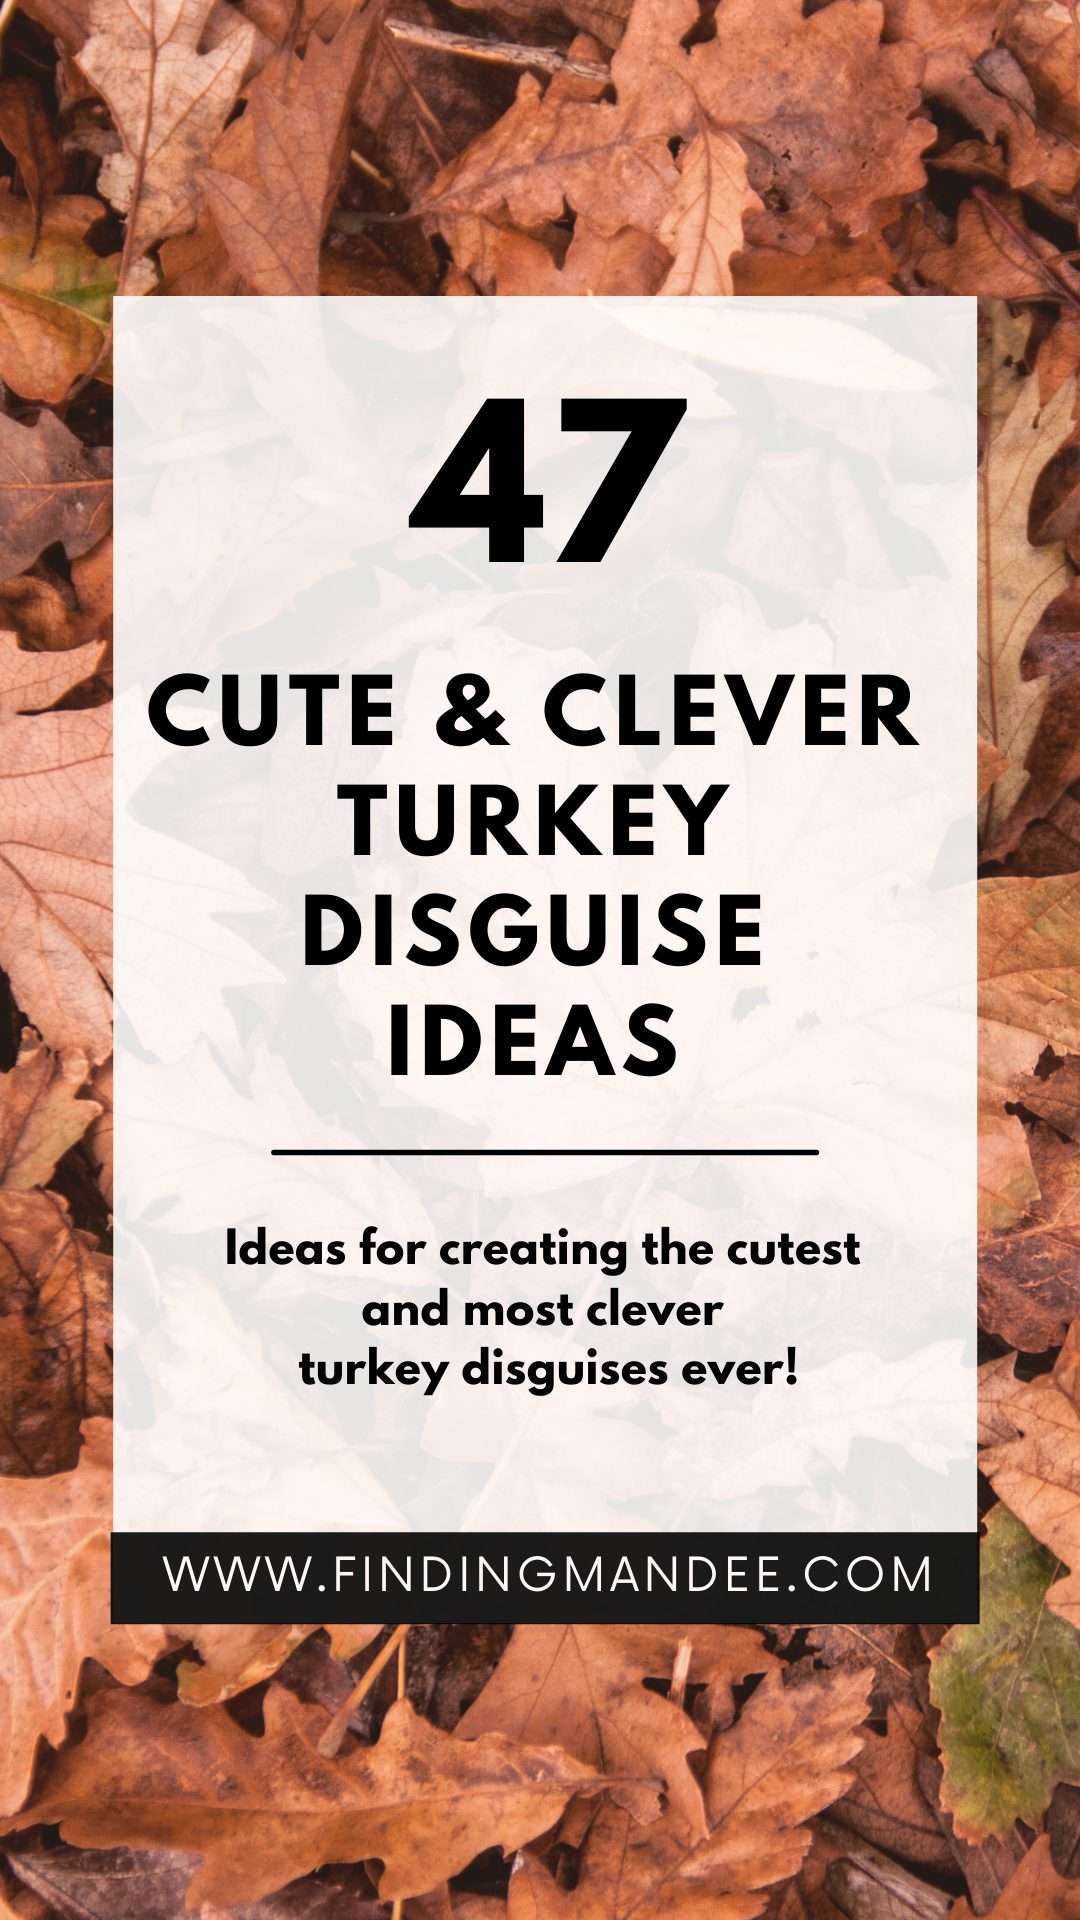 47 Cute and Clever Turkey Disguise Ideas | Finding Mandee